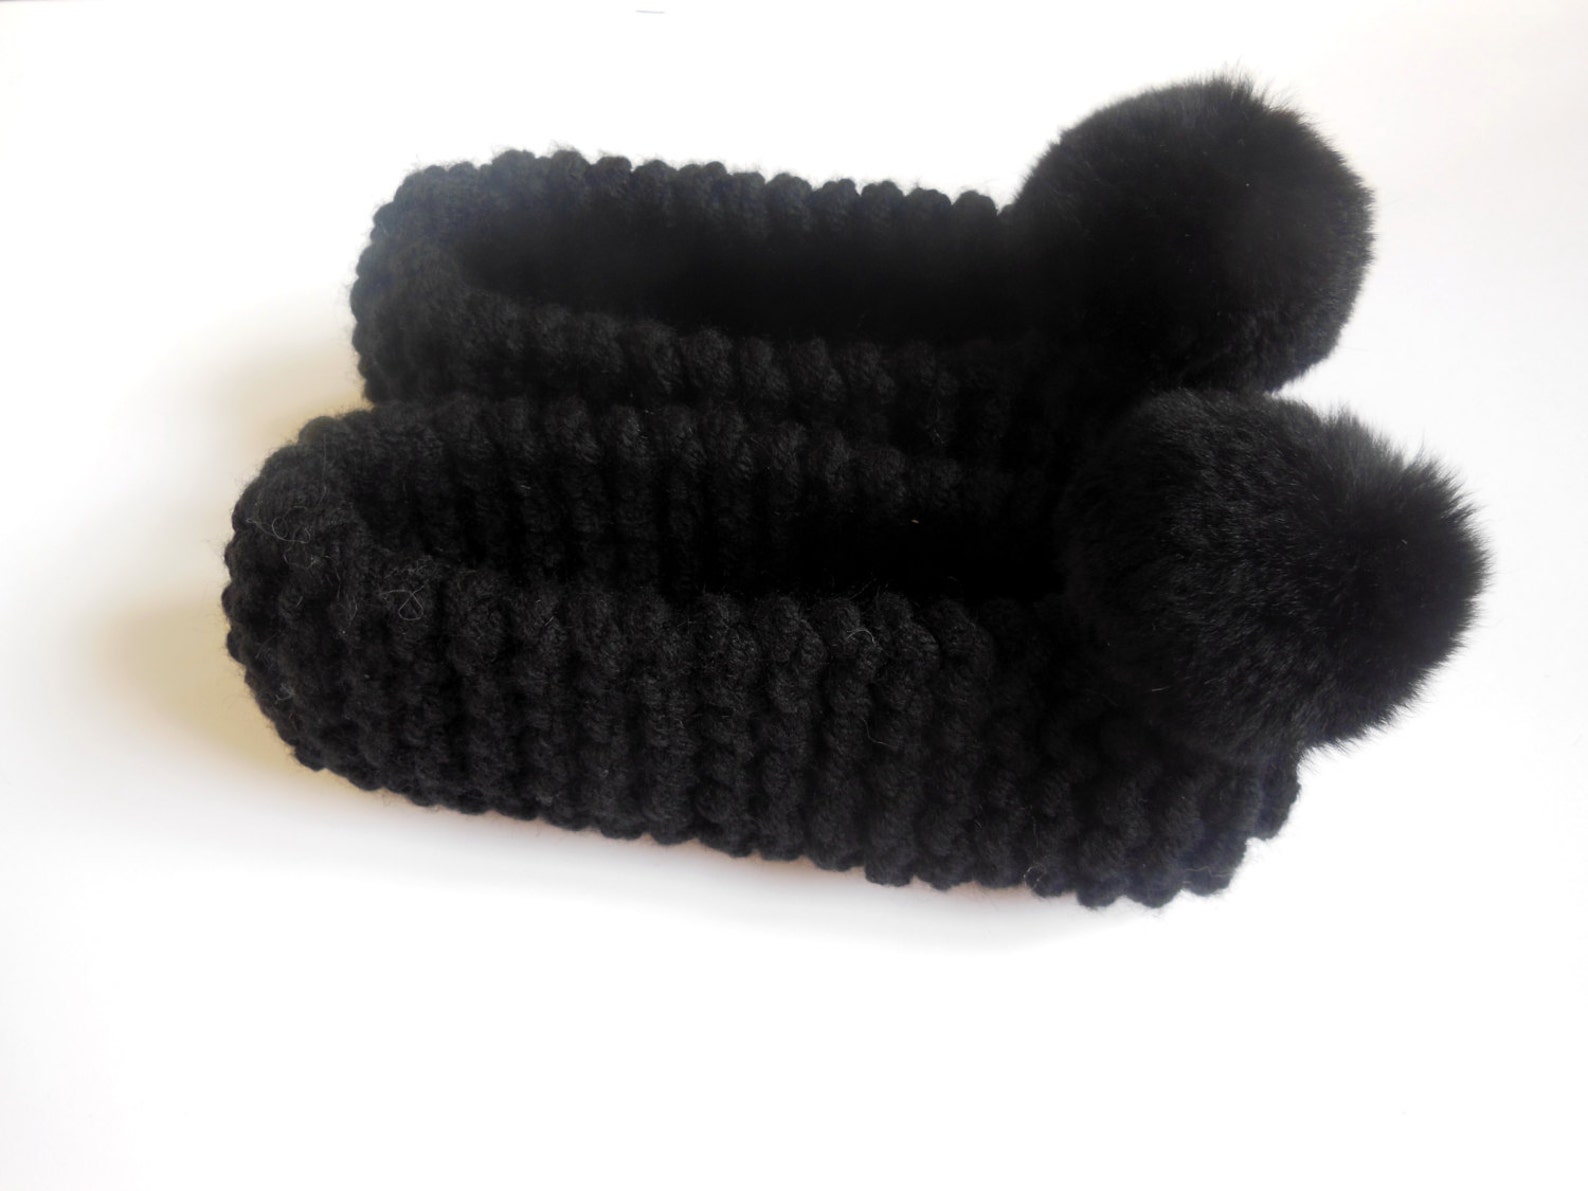 black chunky slippers, womens slippers, non-slip slippers, real or faux fur pom pom, ballet flats, gift for her, gift wrapping,